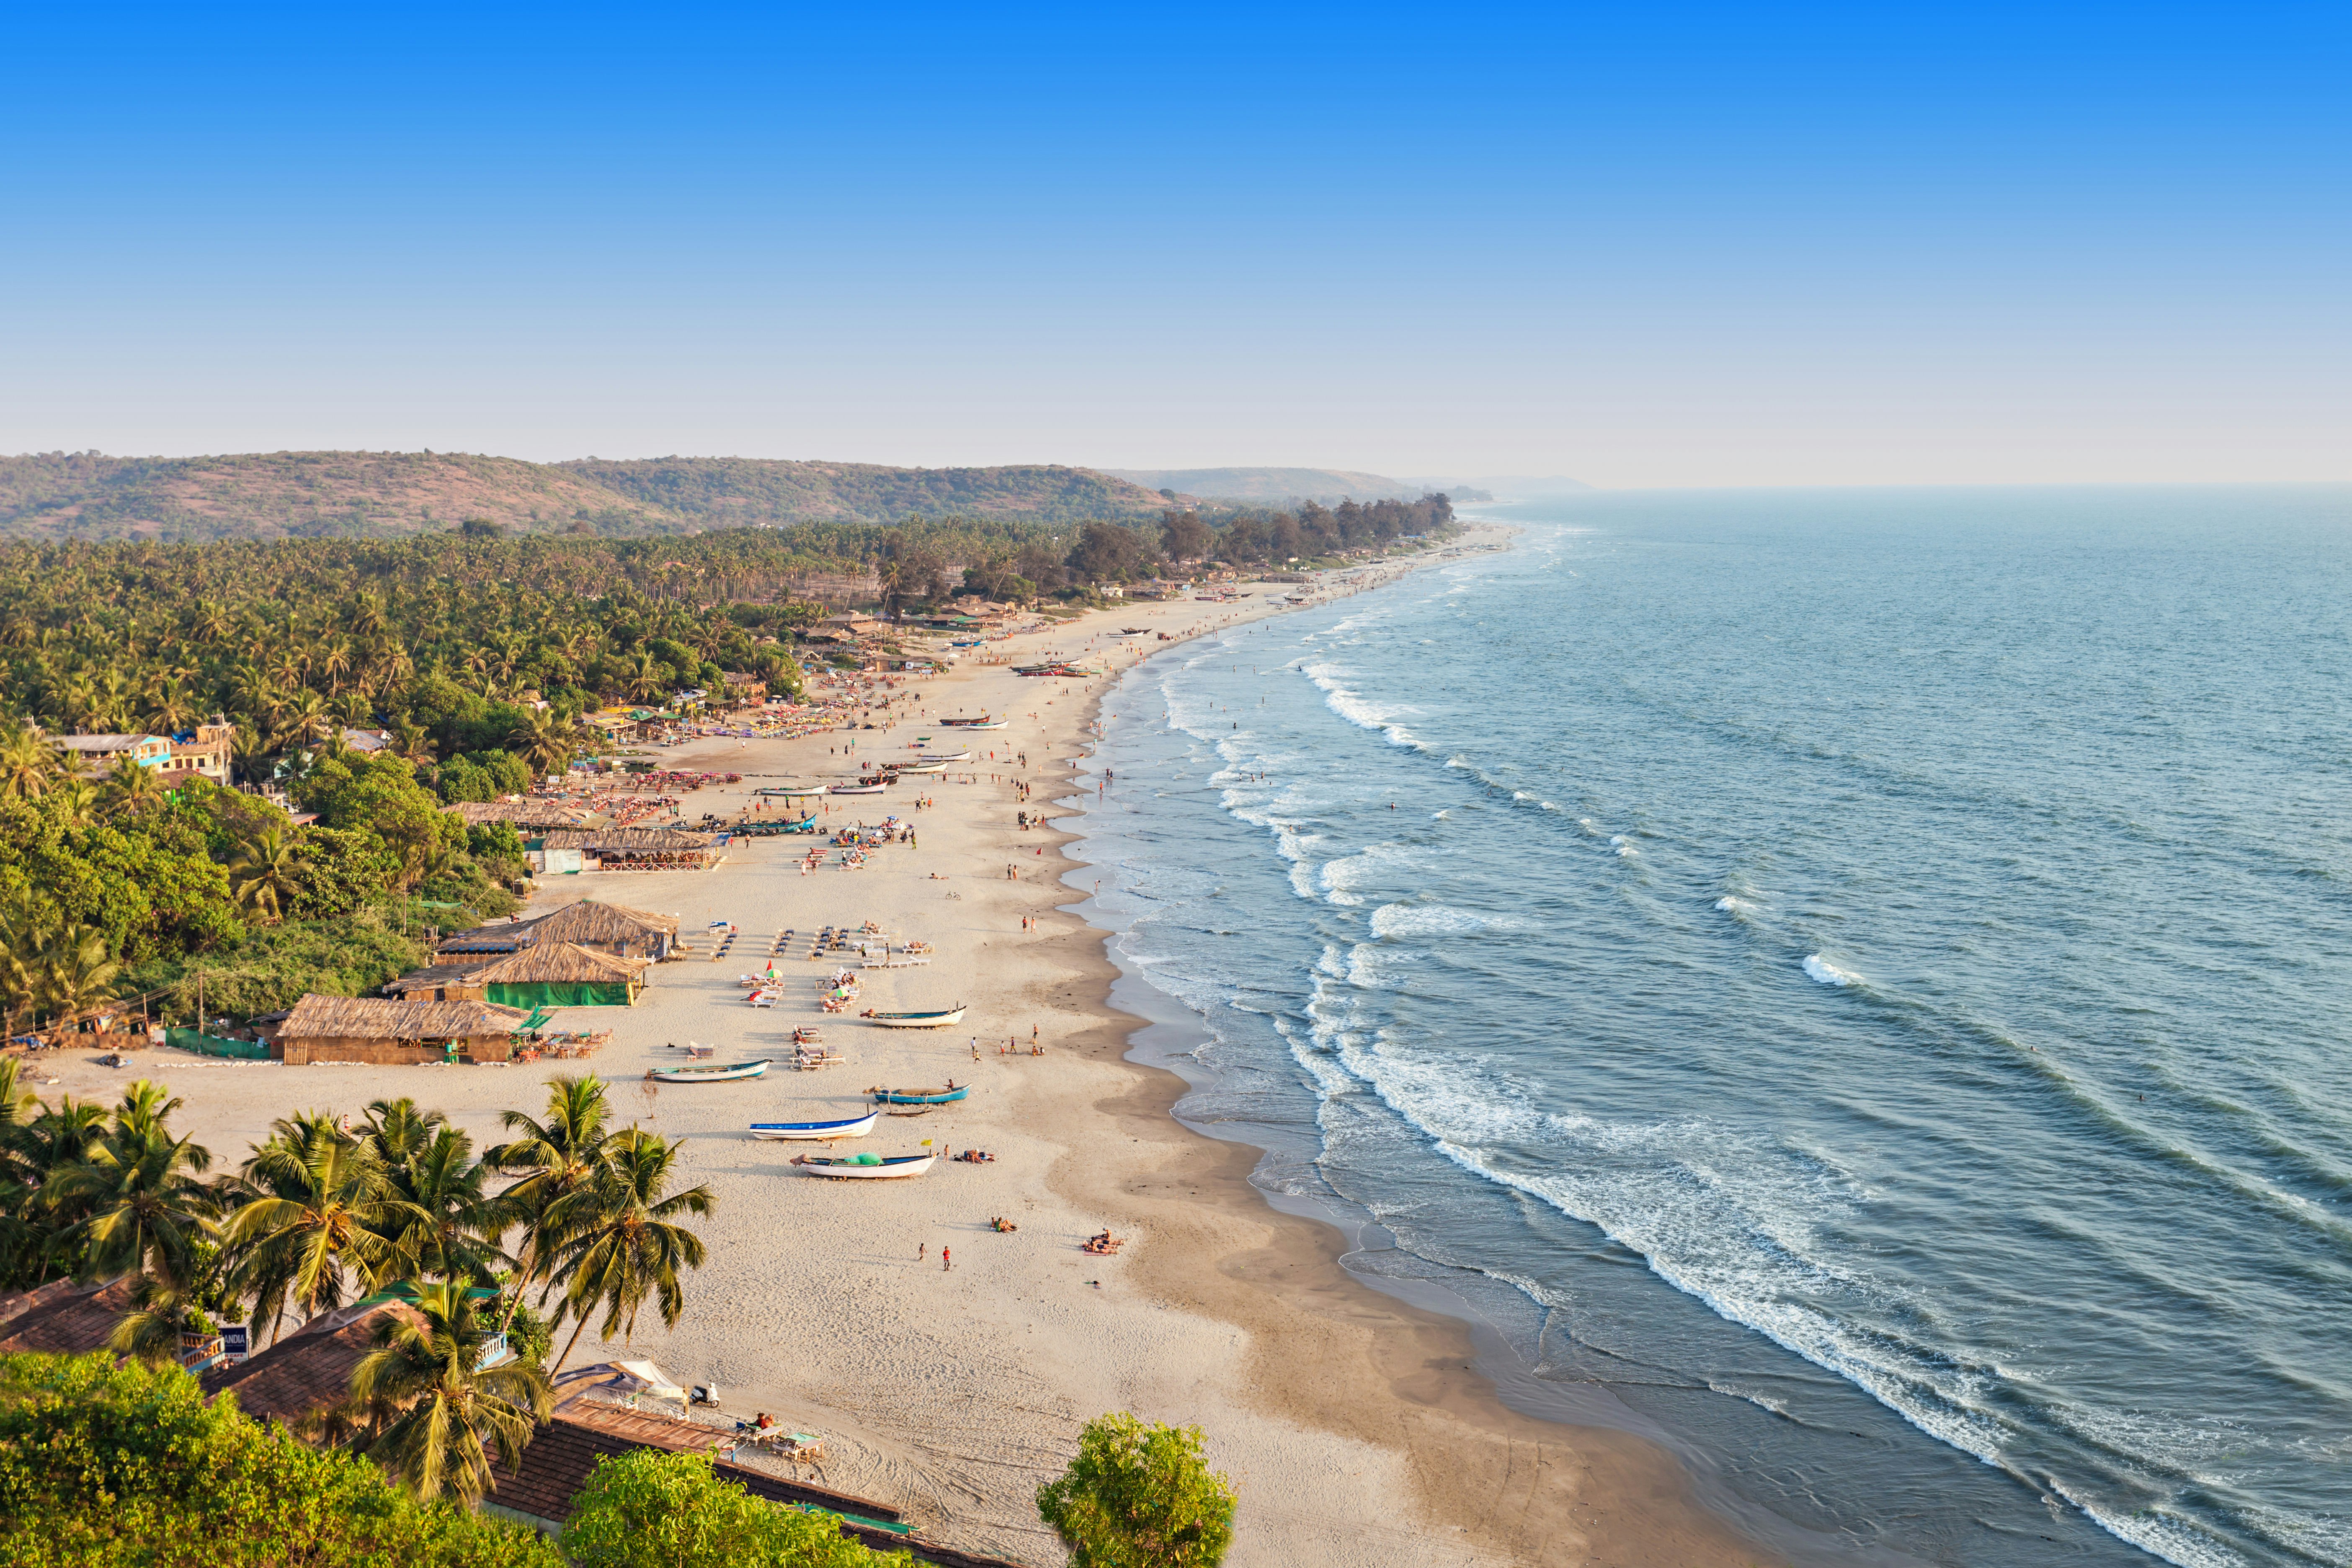 High-angle view of Arambol beach: a white stretch of sand being lapped by waves and backed by palm tress. On the sand a number of people sunbathe and a handful of colourful fishing boats also line the shore.